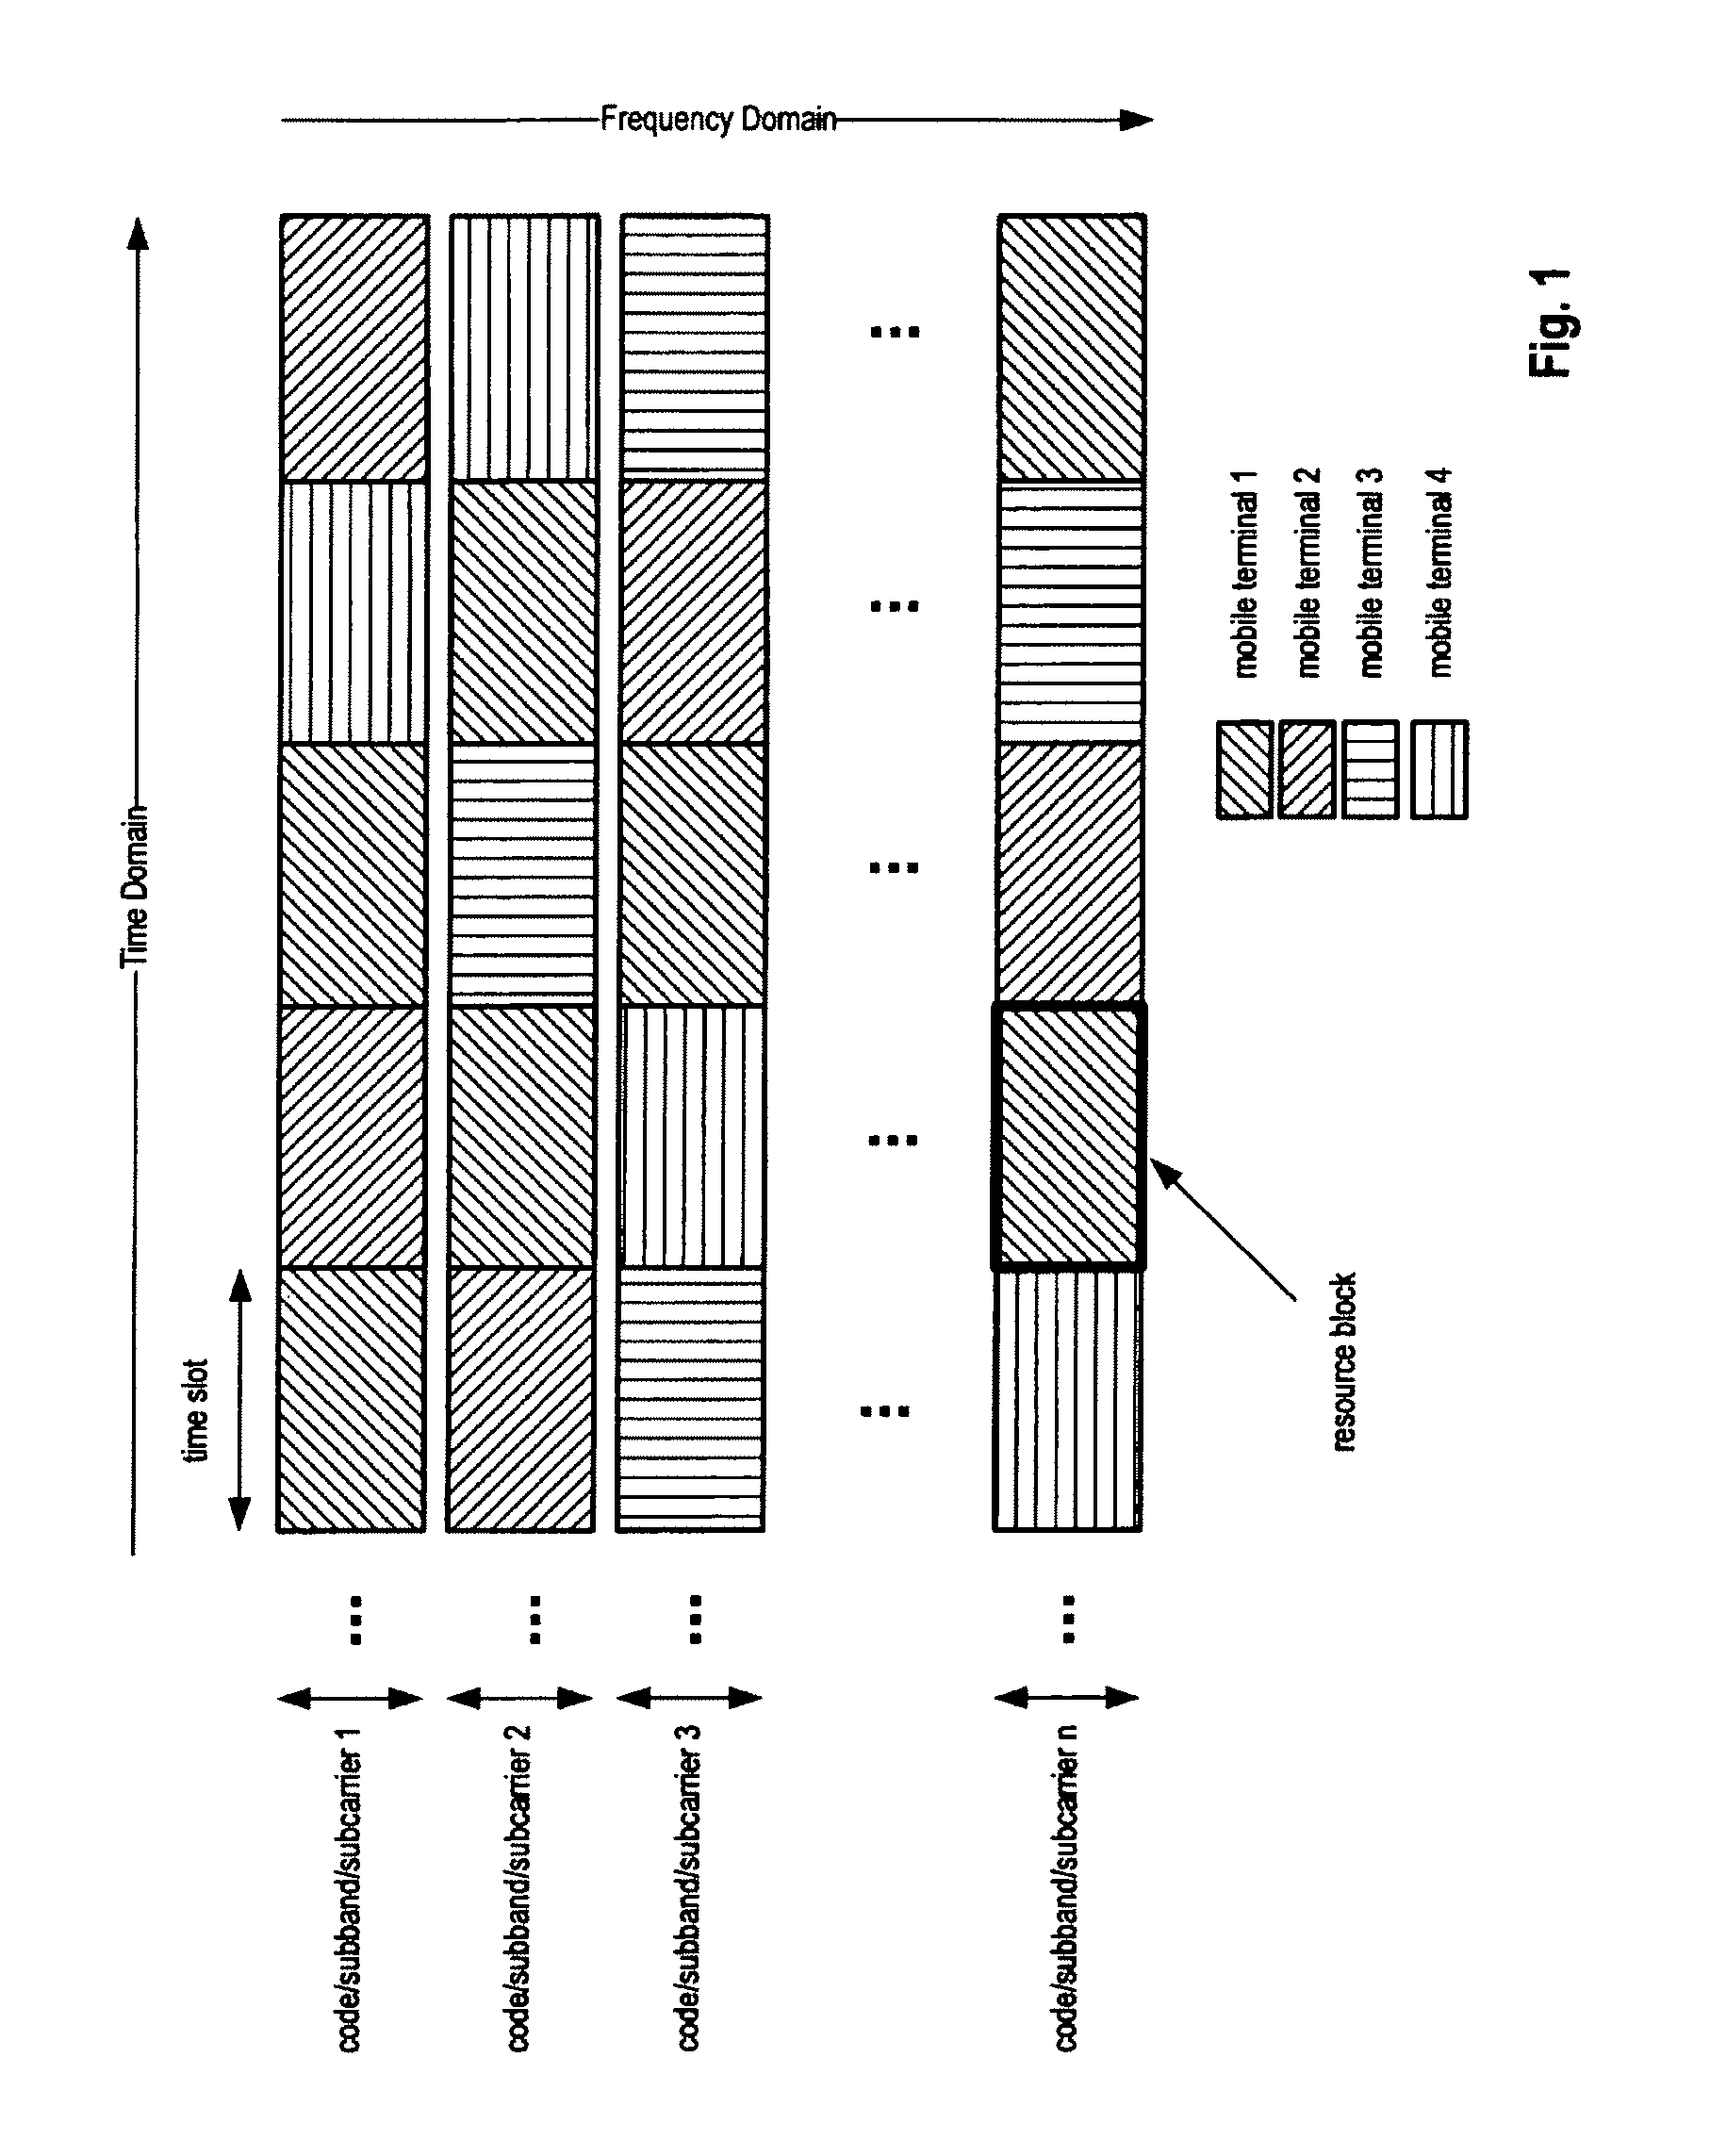 Resource reservation for users in a mobile communication system